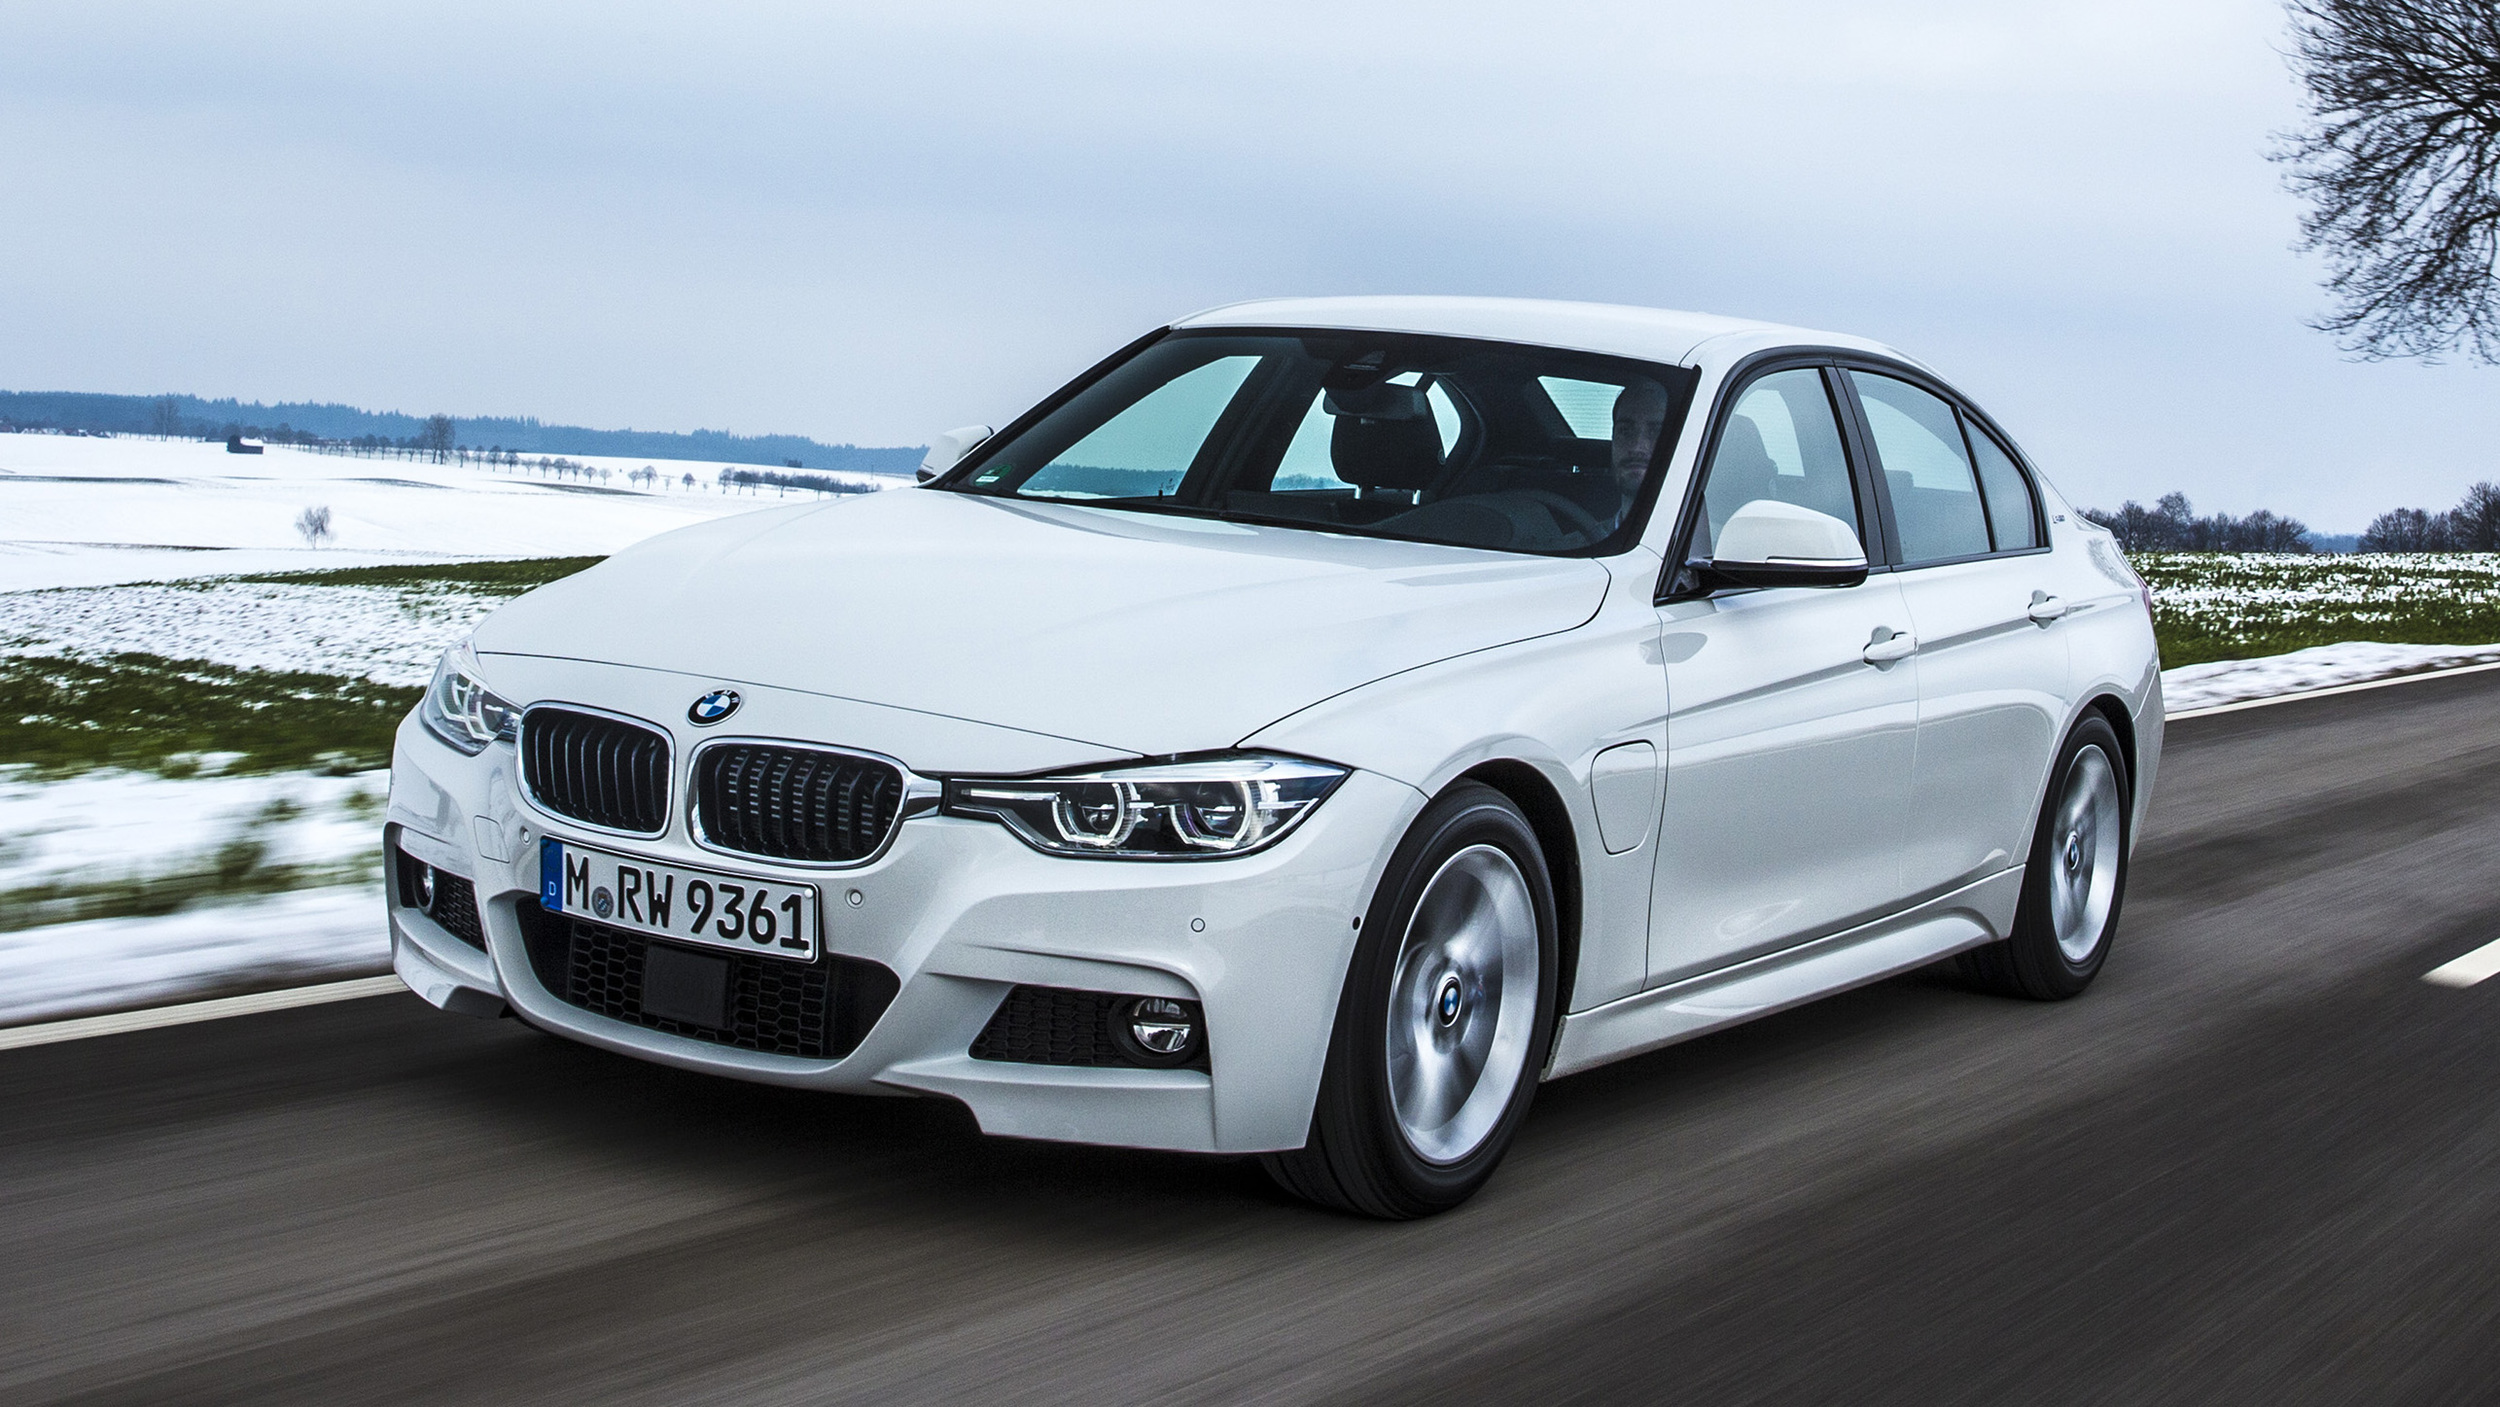 2016 Bmw 330e Is Here For You To Check Out The Hybrid First Drive